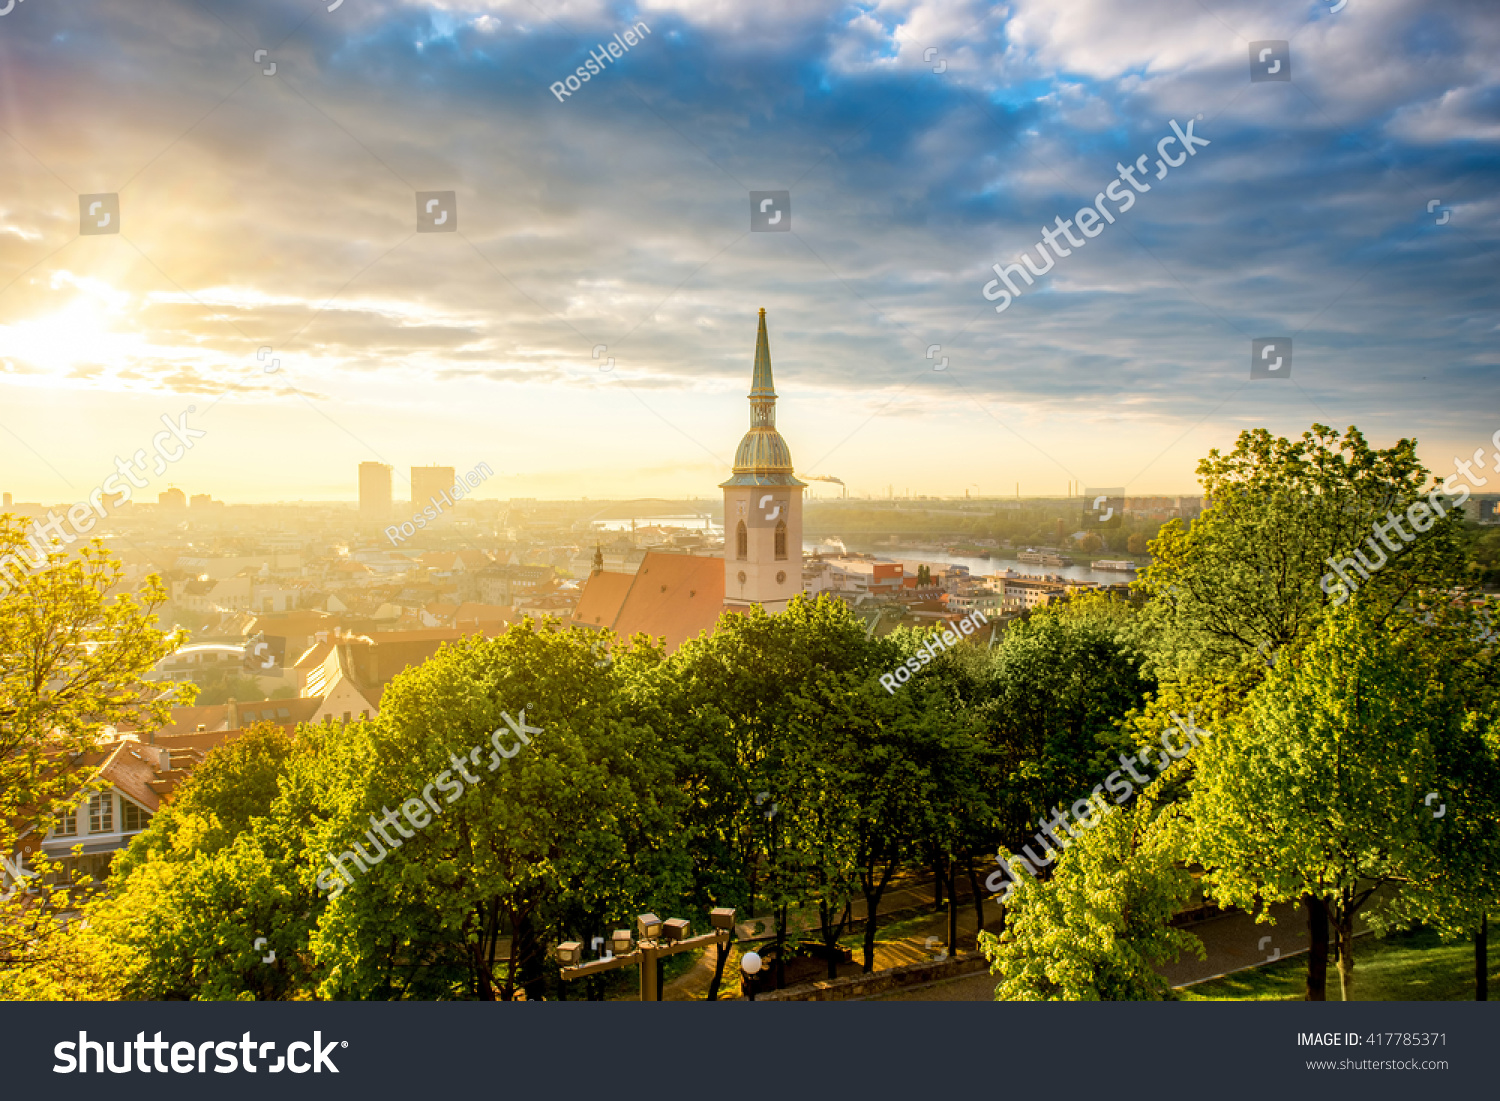 Bratislava cityscape view on the old town with Saint Martin's cathedral tower from the castle hill on the morning in Slovakia #417785371